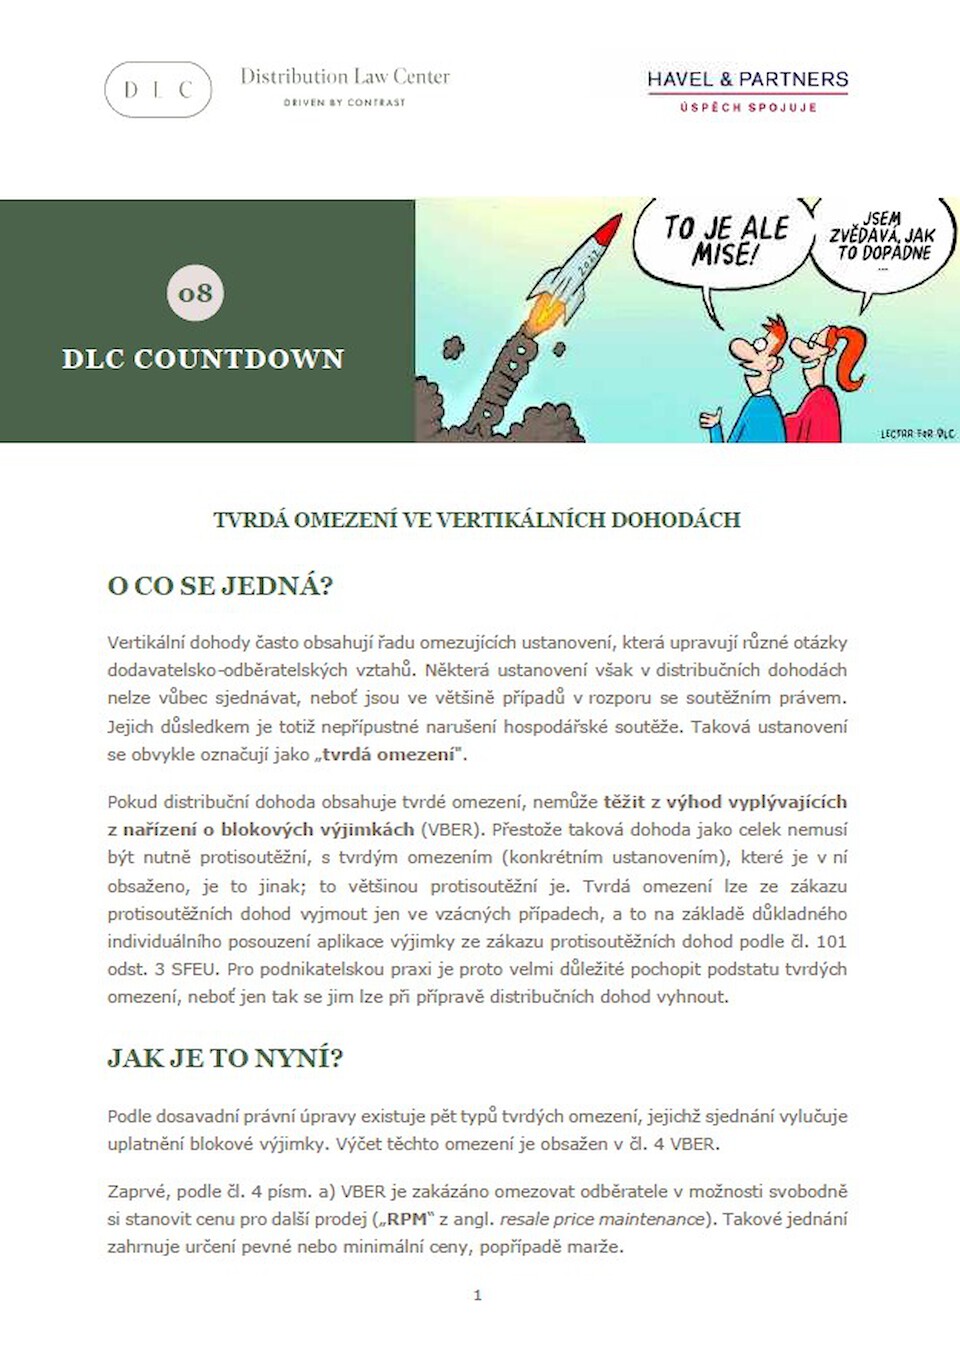 Distribution Law Center Countdown VIII - Hardcore restrictions (general)